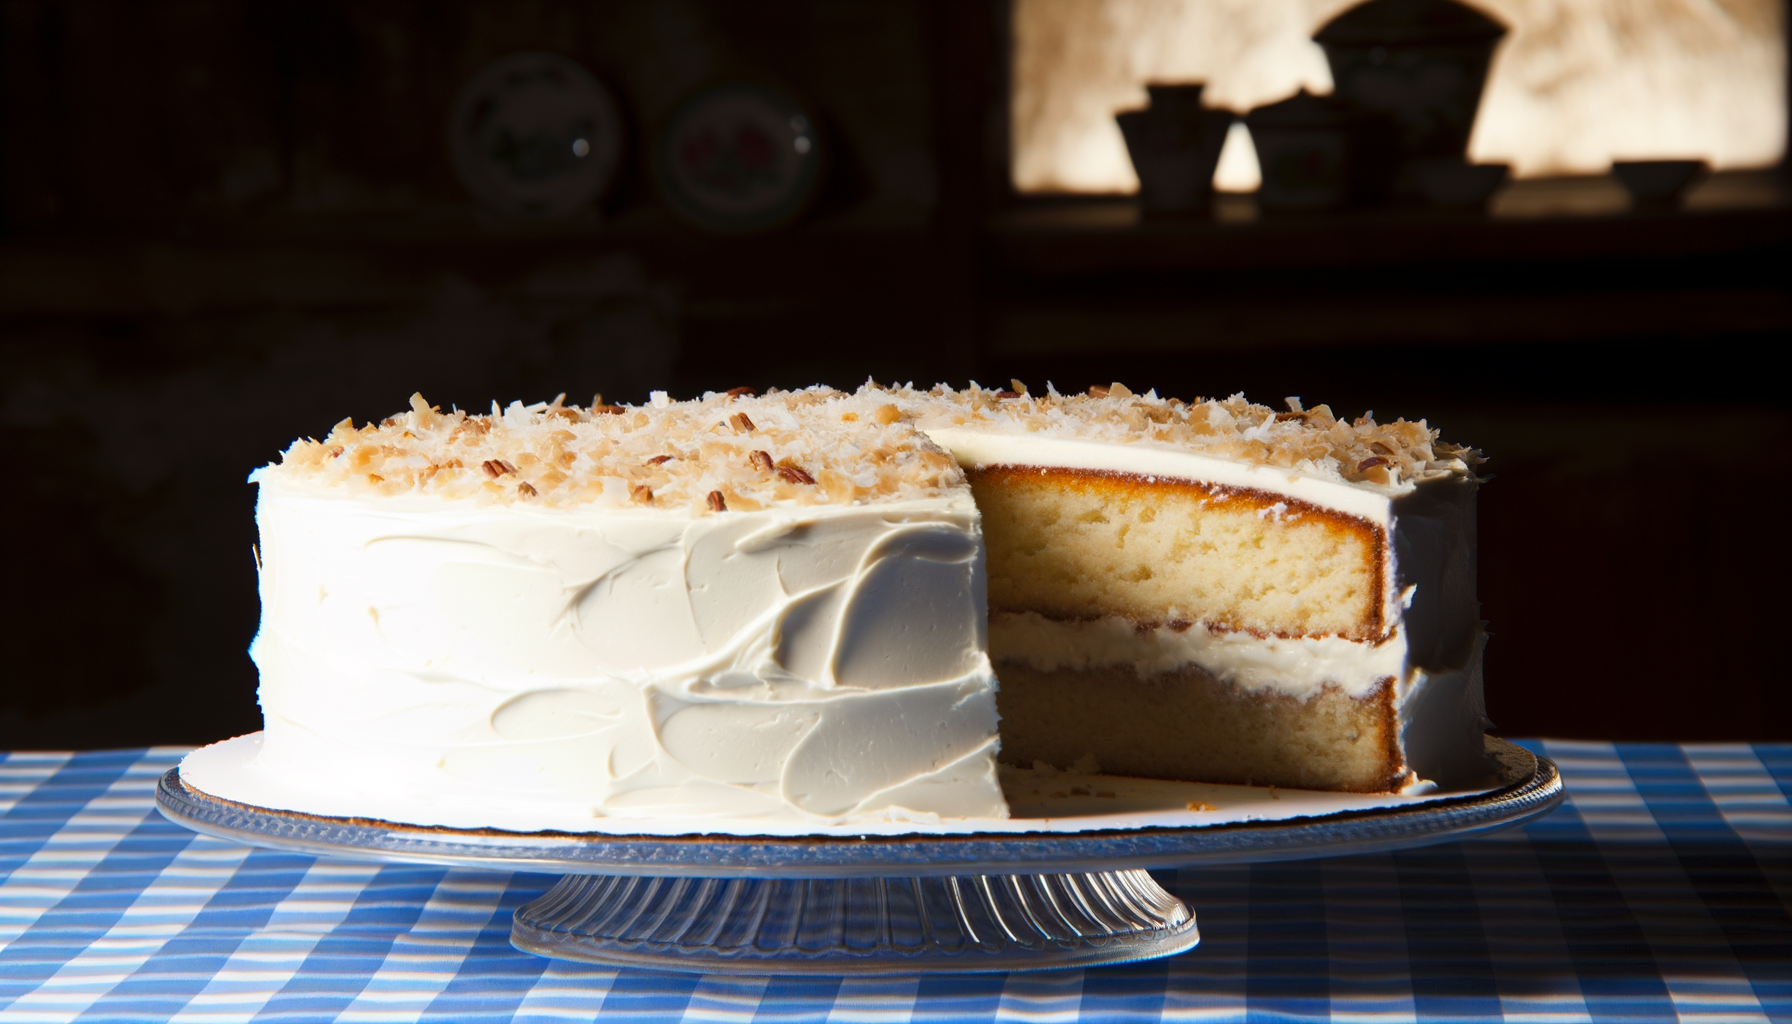 Italian Cream Cake with coconut-pecan topping on a blue checkered tablecloth, cream cheese frosting glistening in a rustic setting.